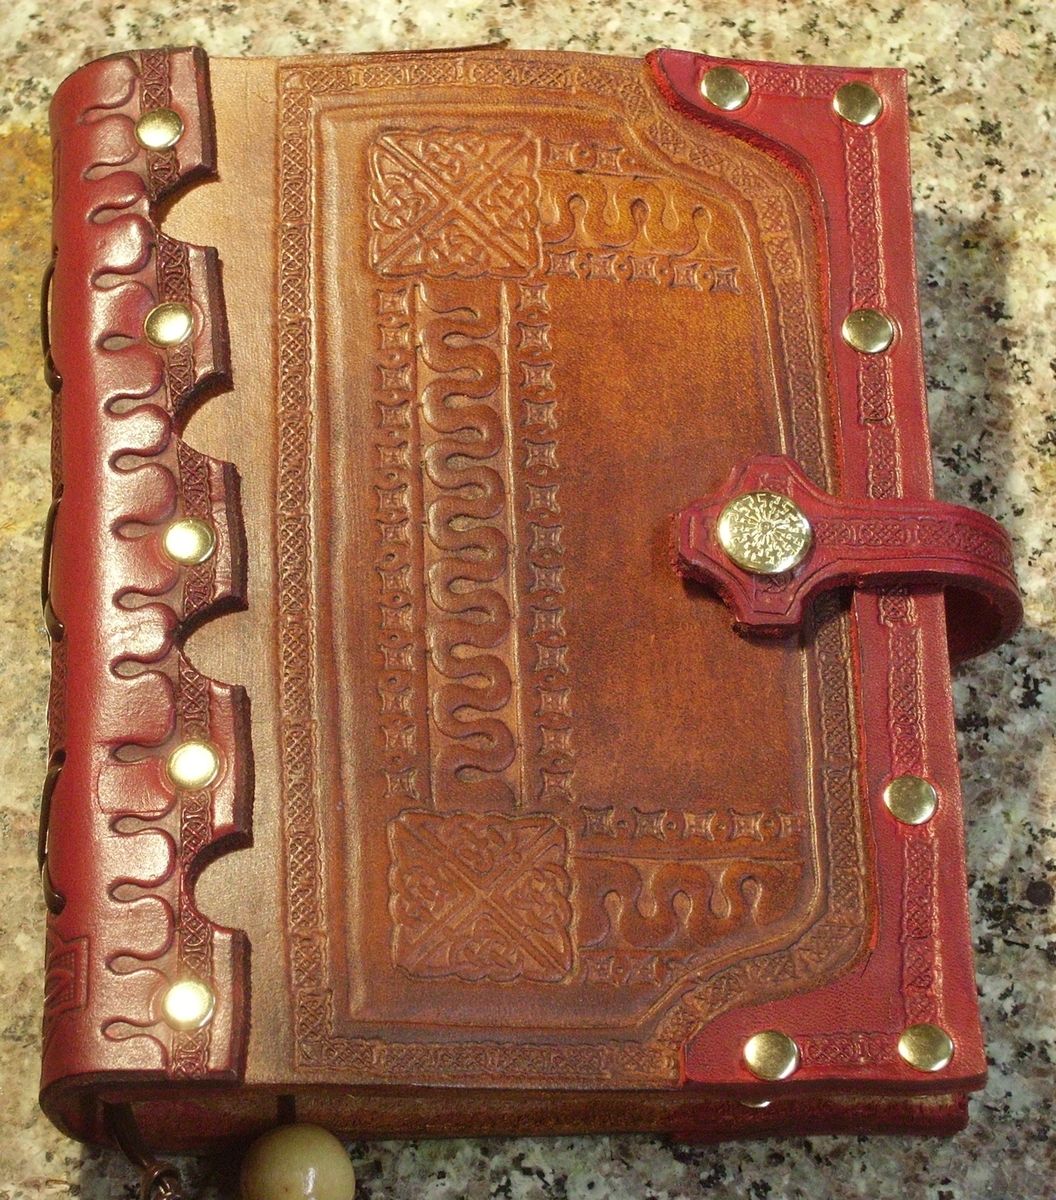 Leather Bound Sketchbook, Handmade in USA